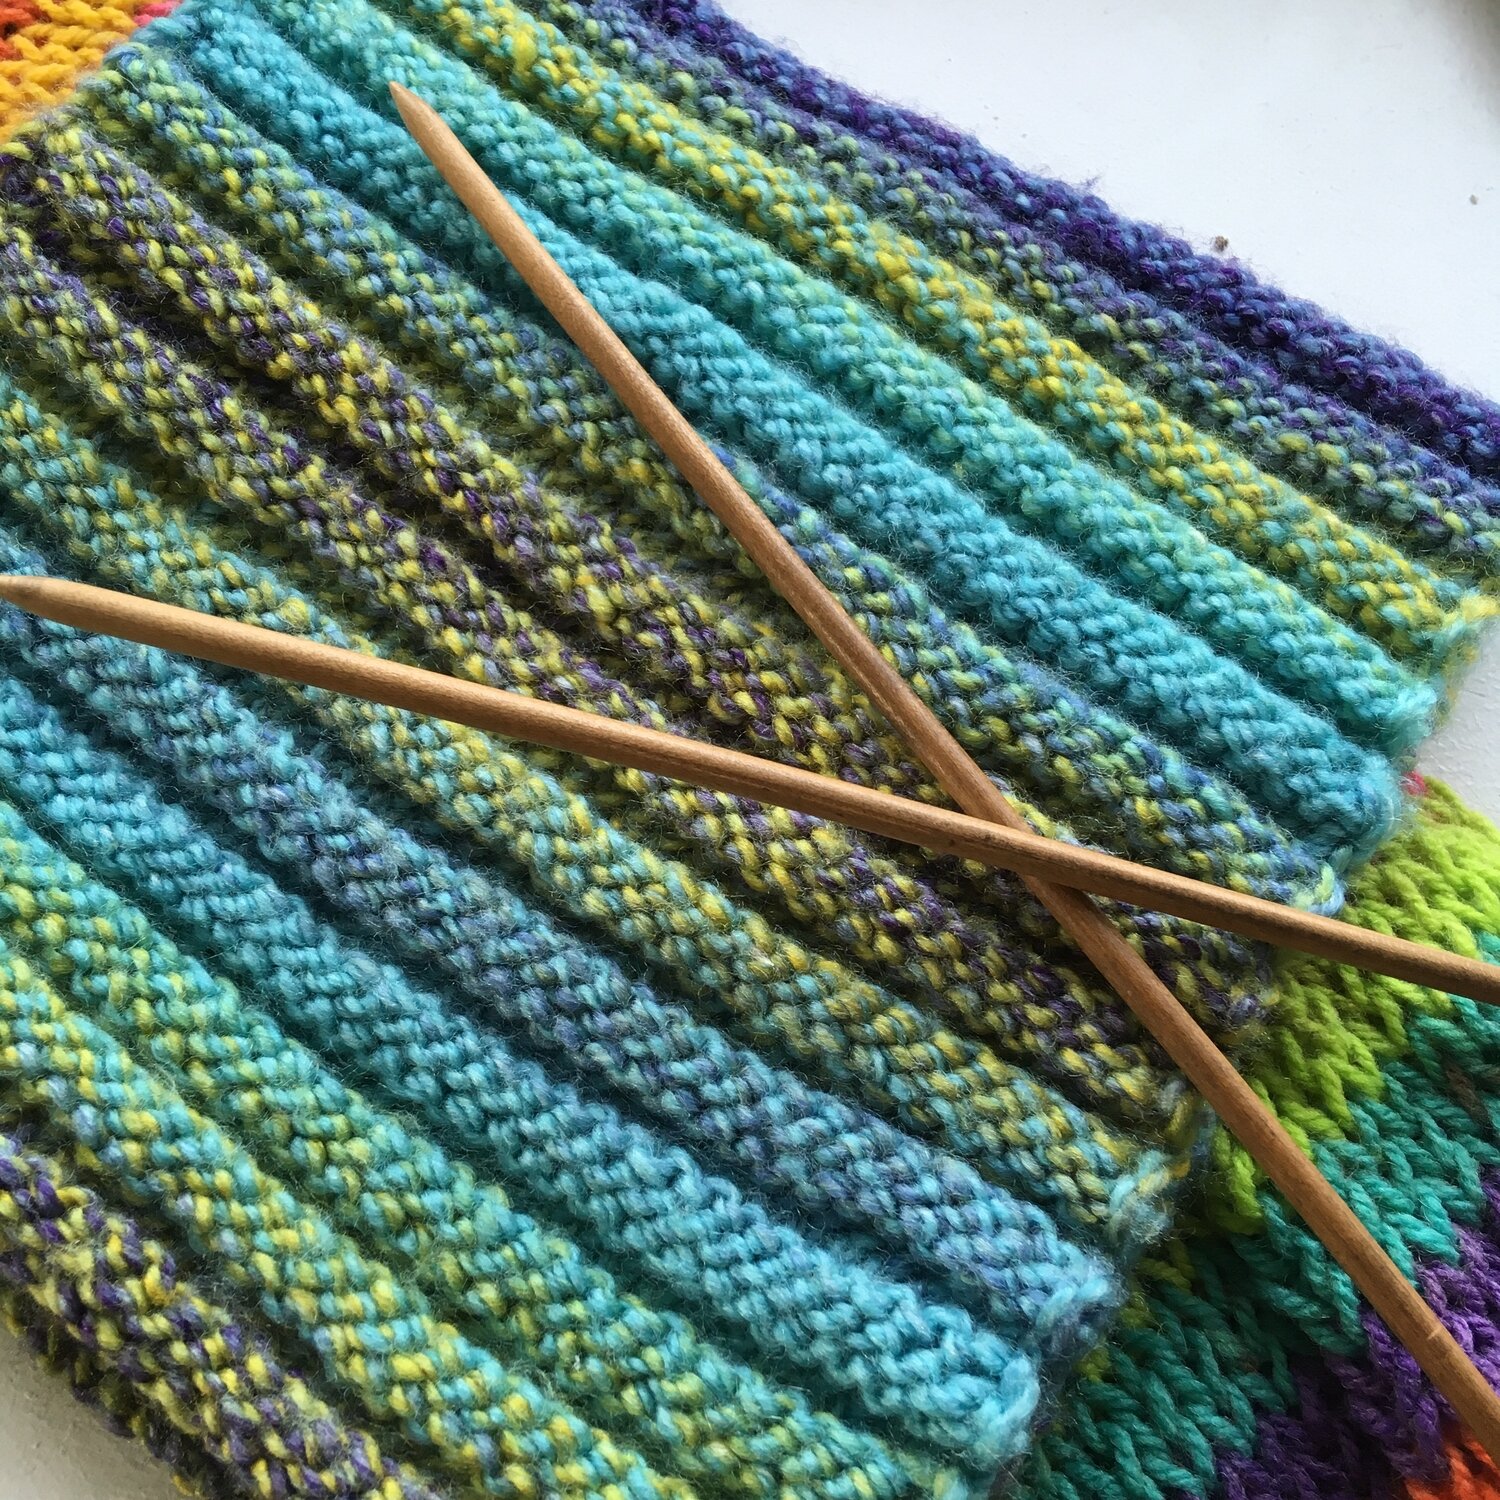 Knitting Course - 6 Evenings